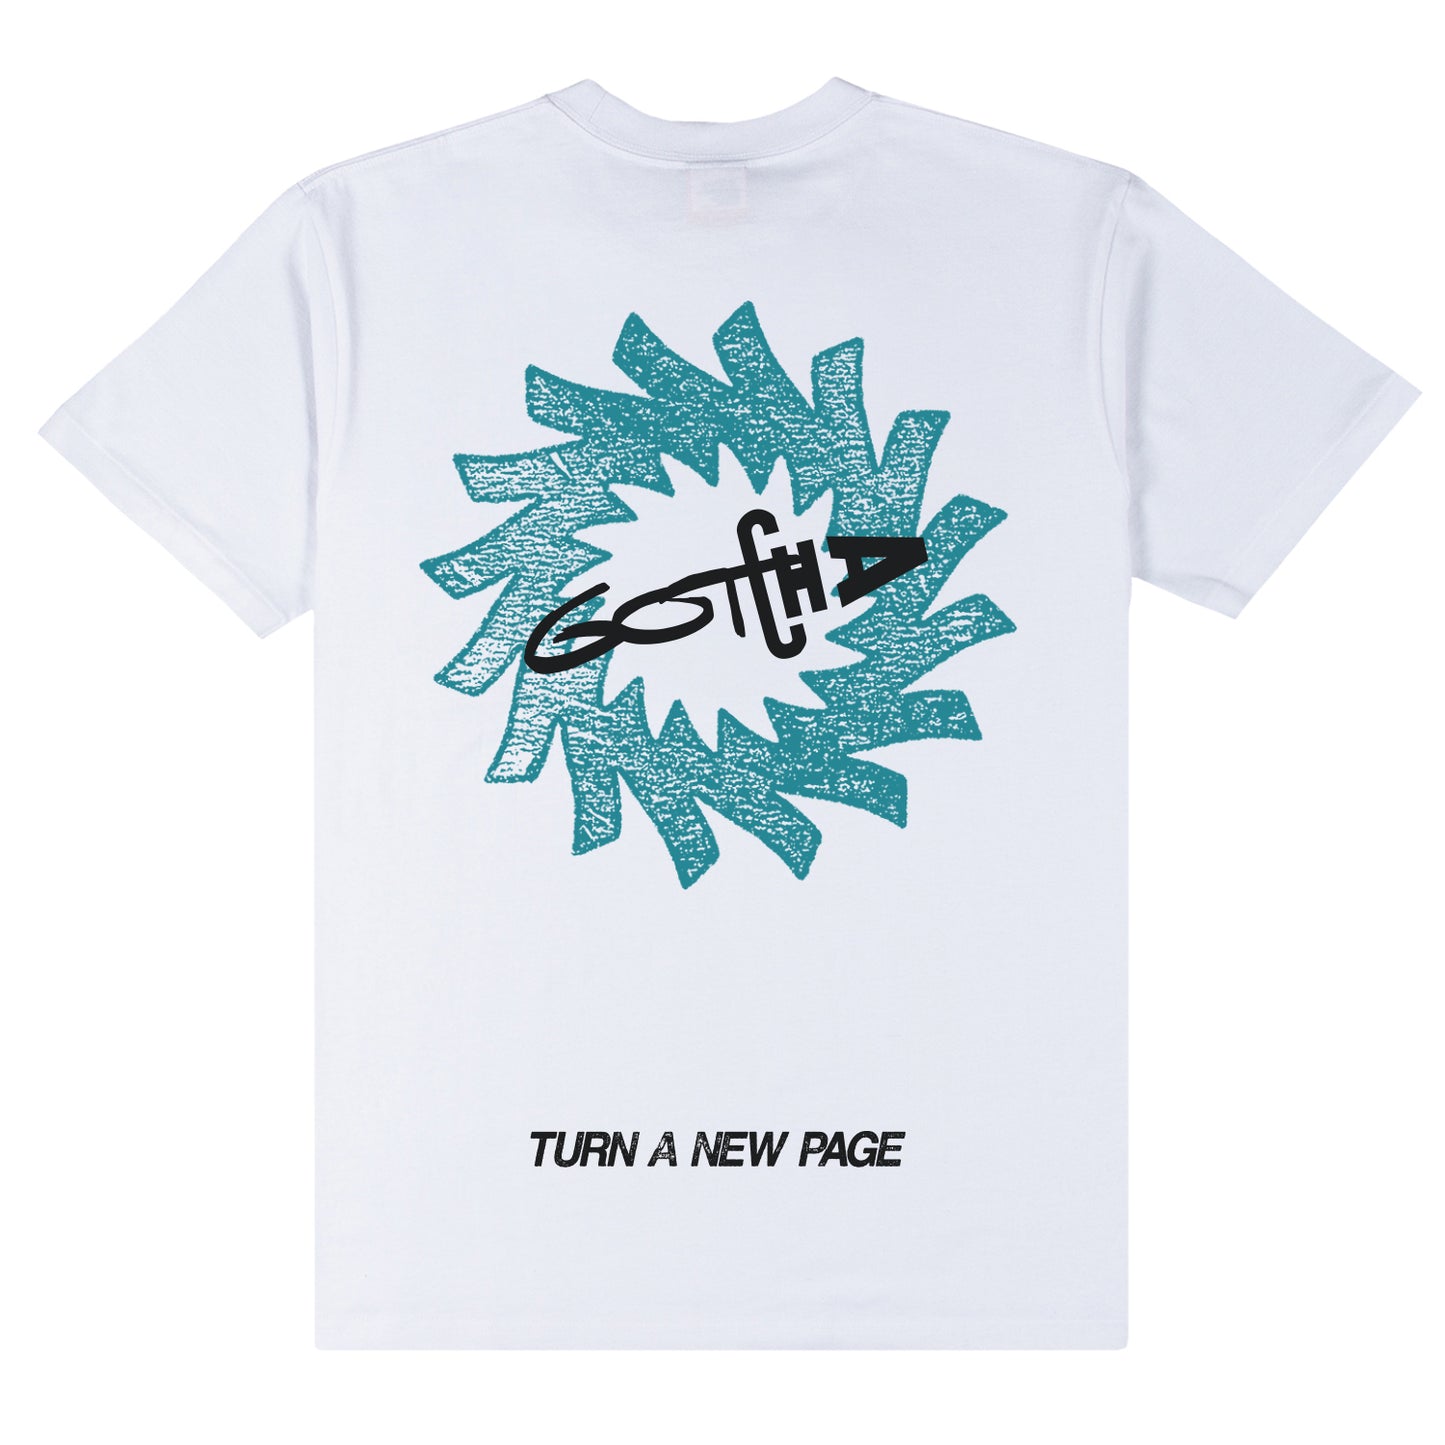 Men's Turn A New Page Graphic Tee